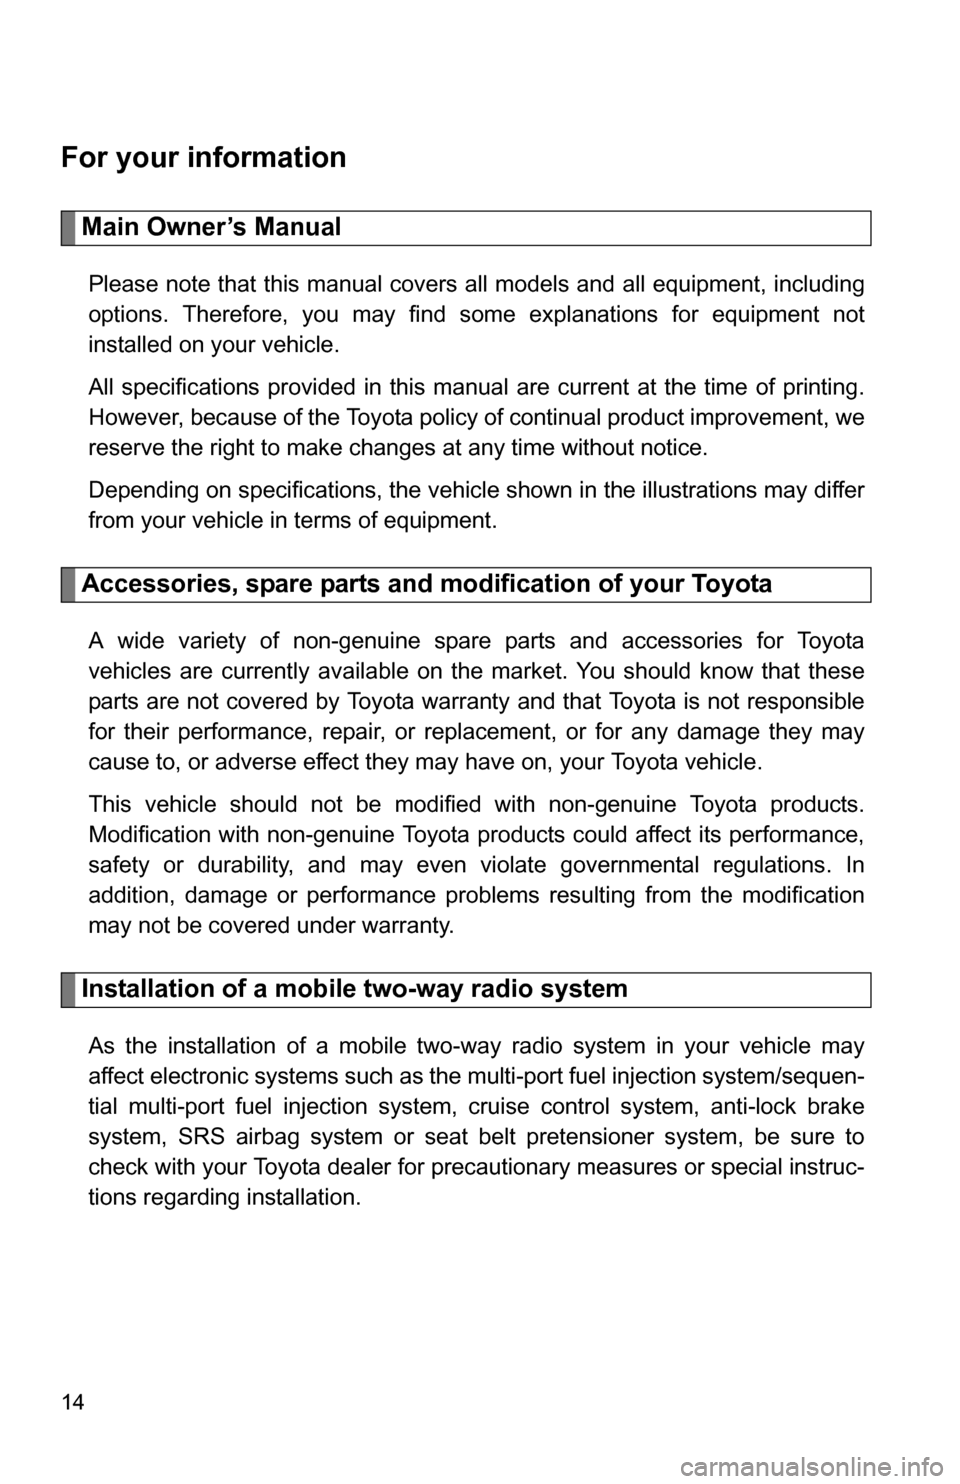 TOYOTA COROLLA 2009 10.G Owners Manual 14
For your information
Main Owner’s Manual
Please note that this manual covers all models and all equipment, including
options. Therefore, you may find some explanations for equipment not
installed